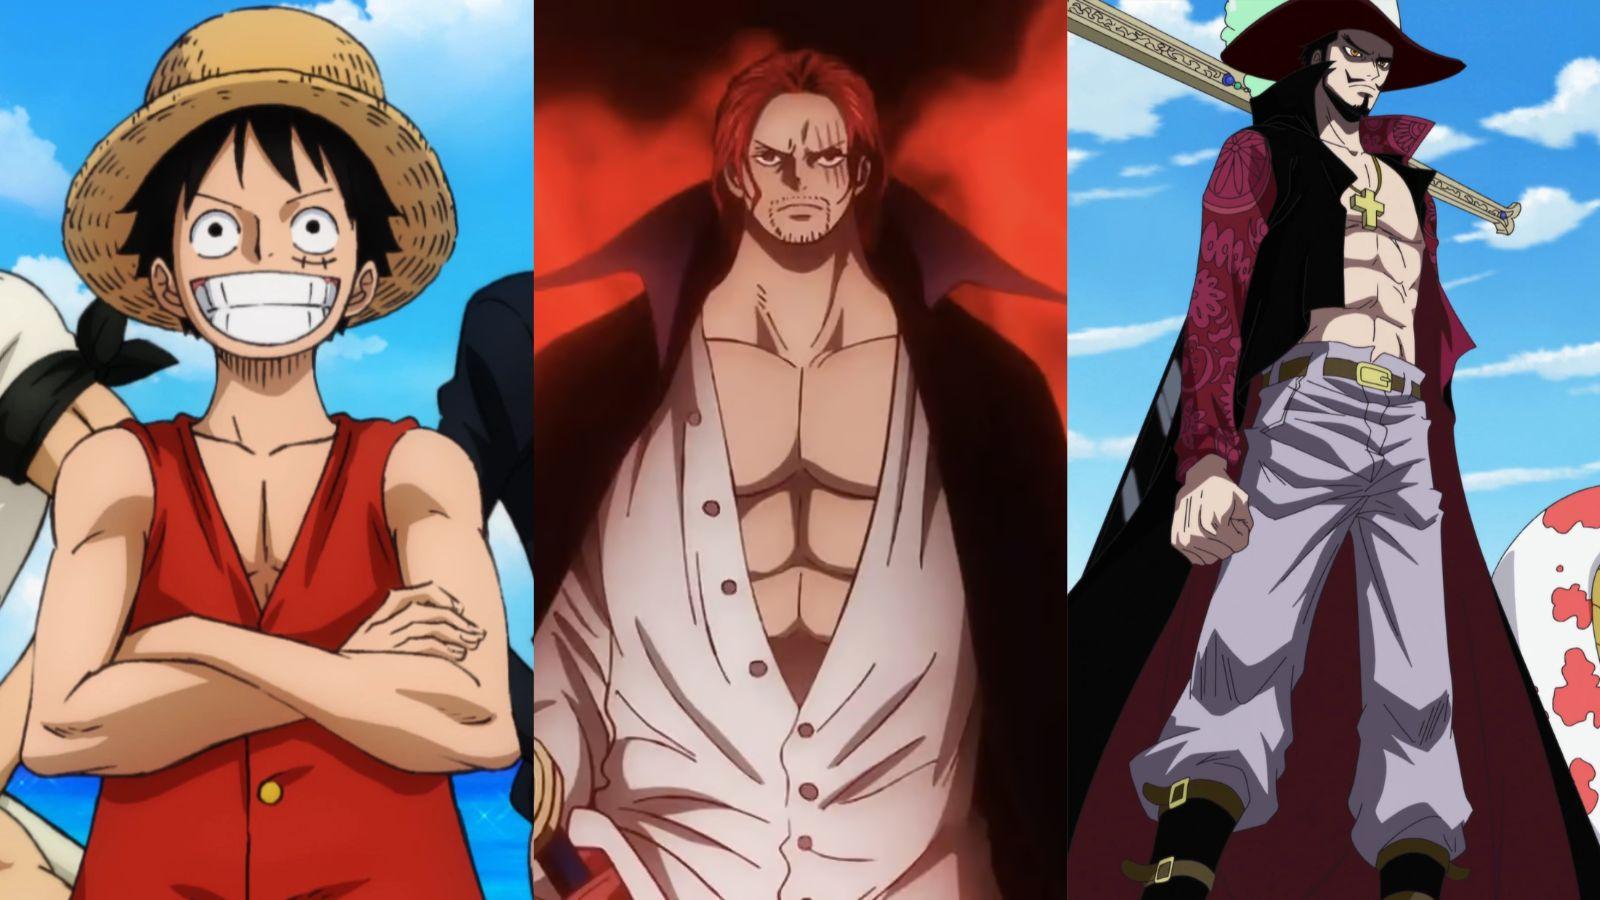 craig stoffel add photo pictures of one piece characters